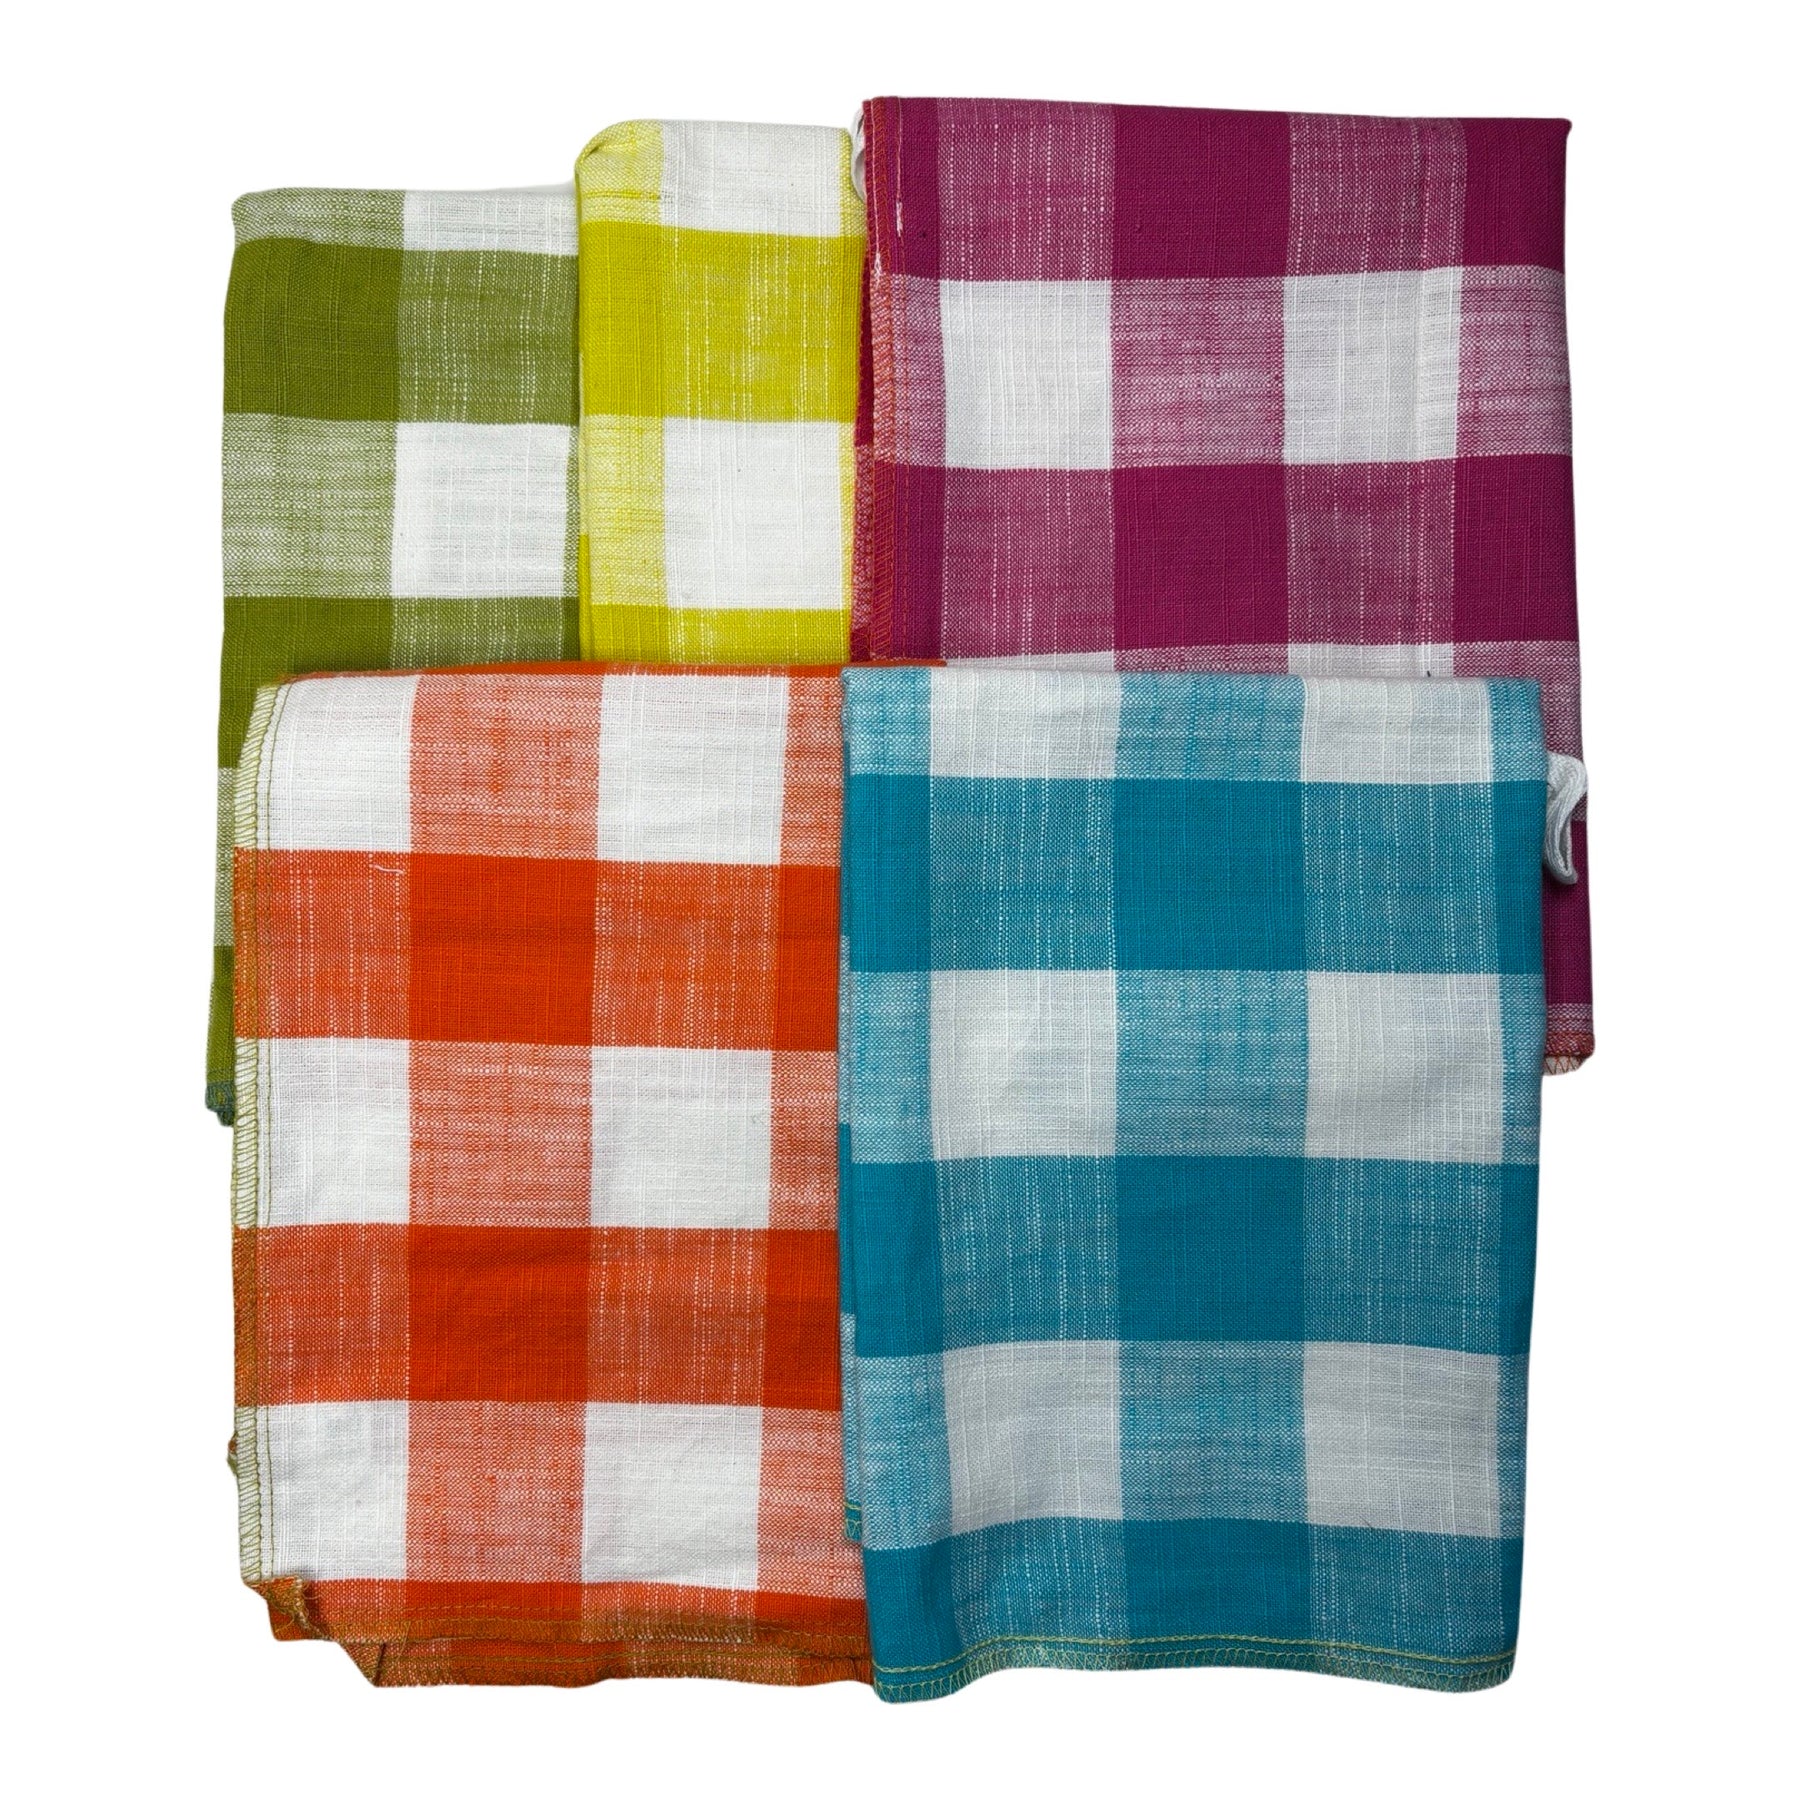 5pc Colorful Buffalo Plaid 26" x 15" Dish Towels by TAG - 100% Cotton